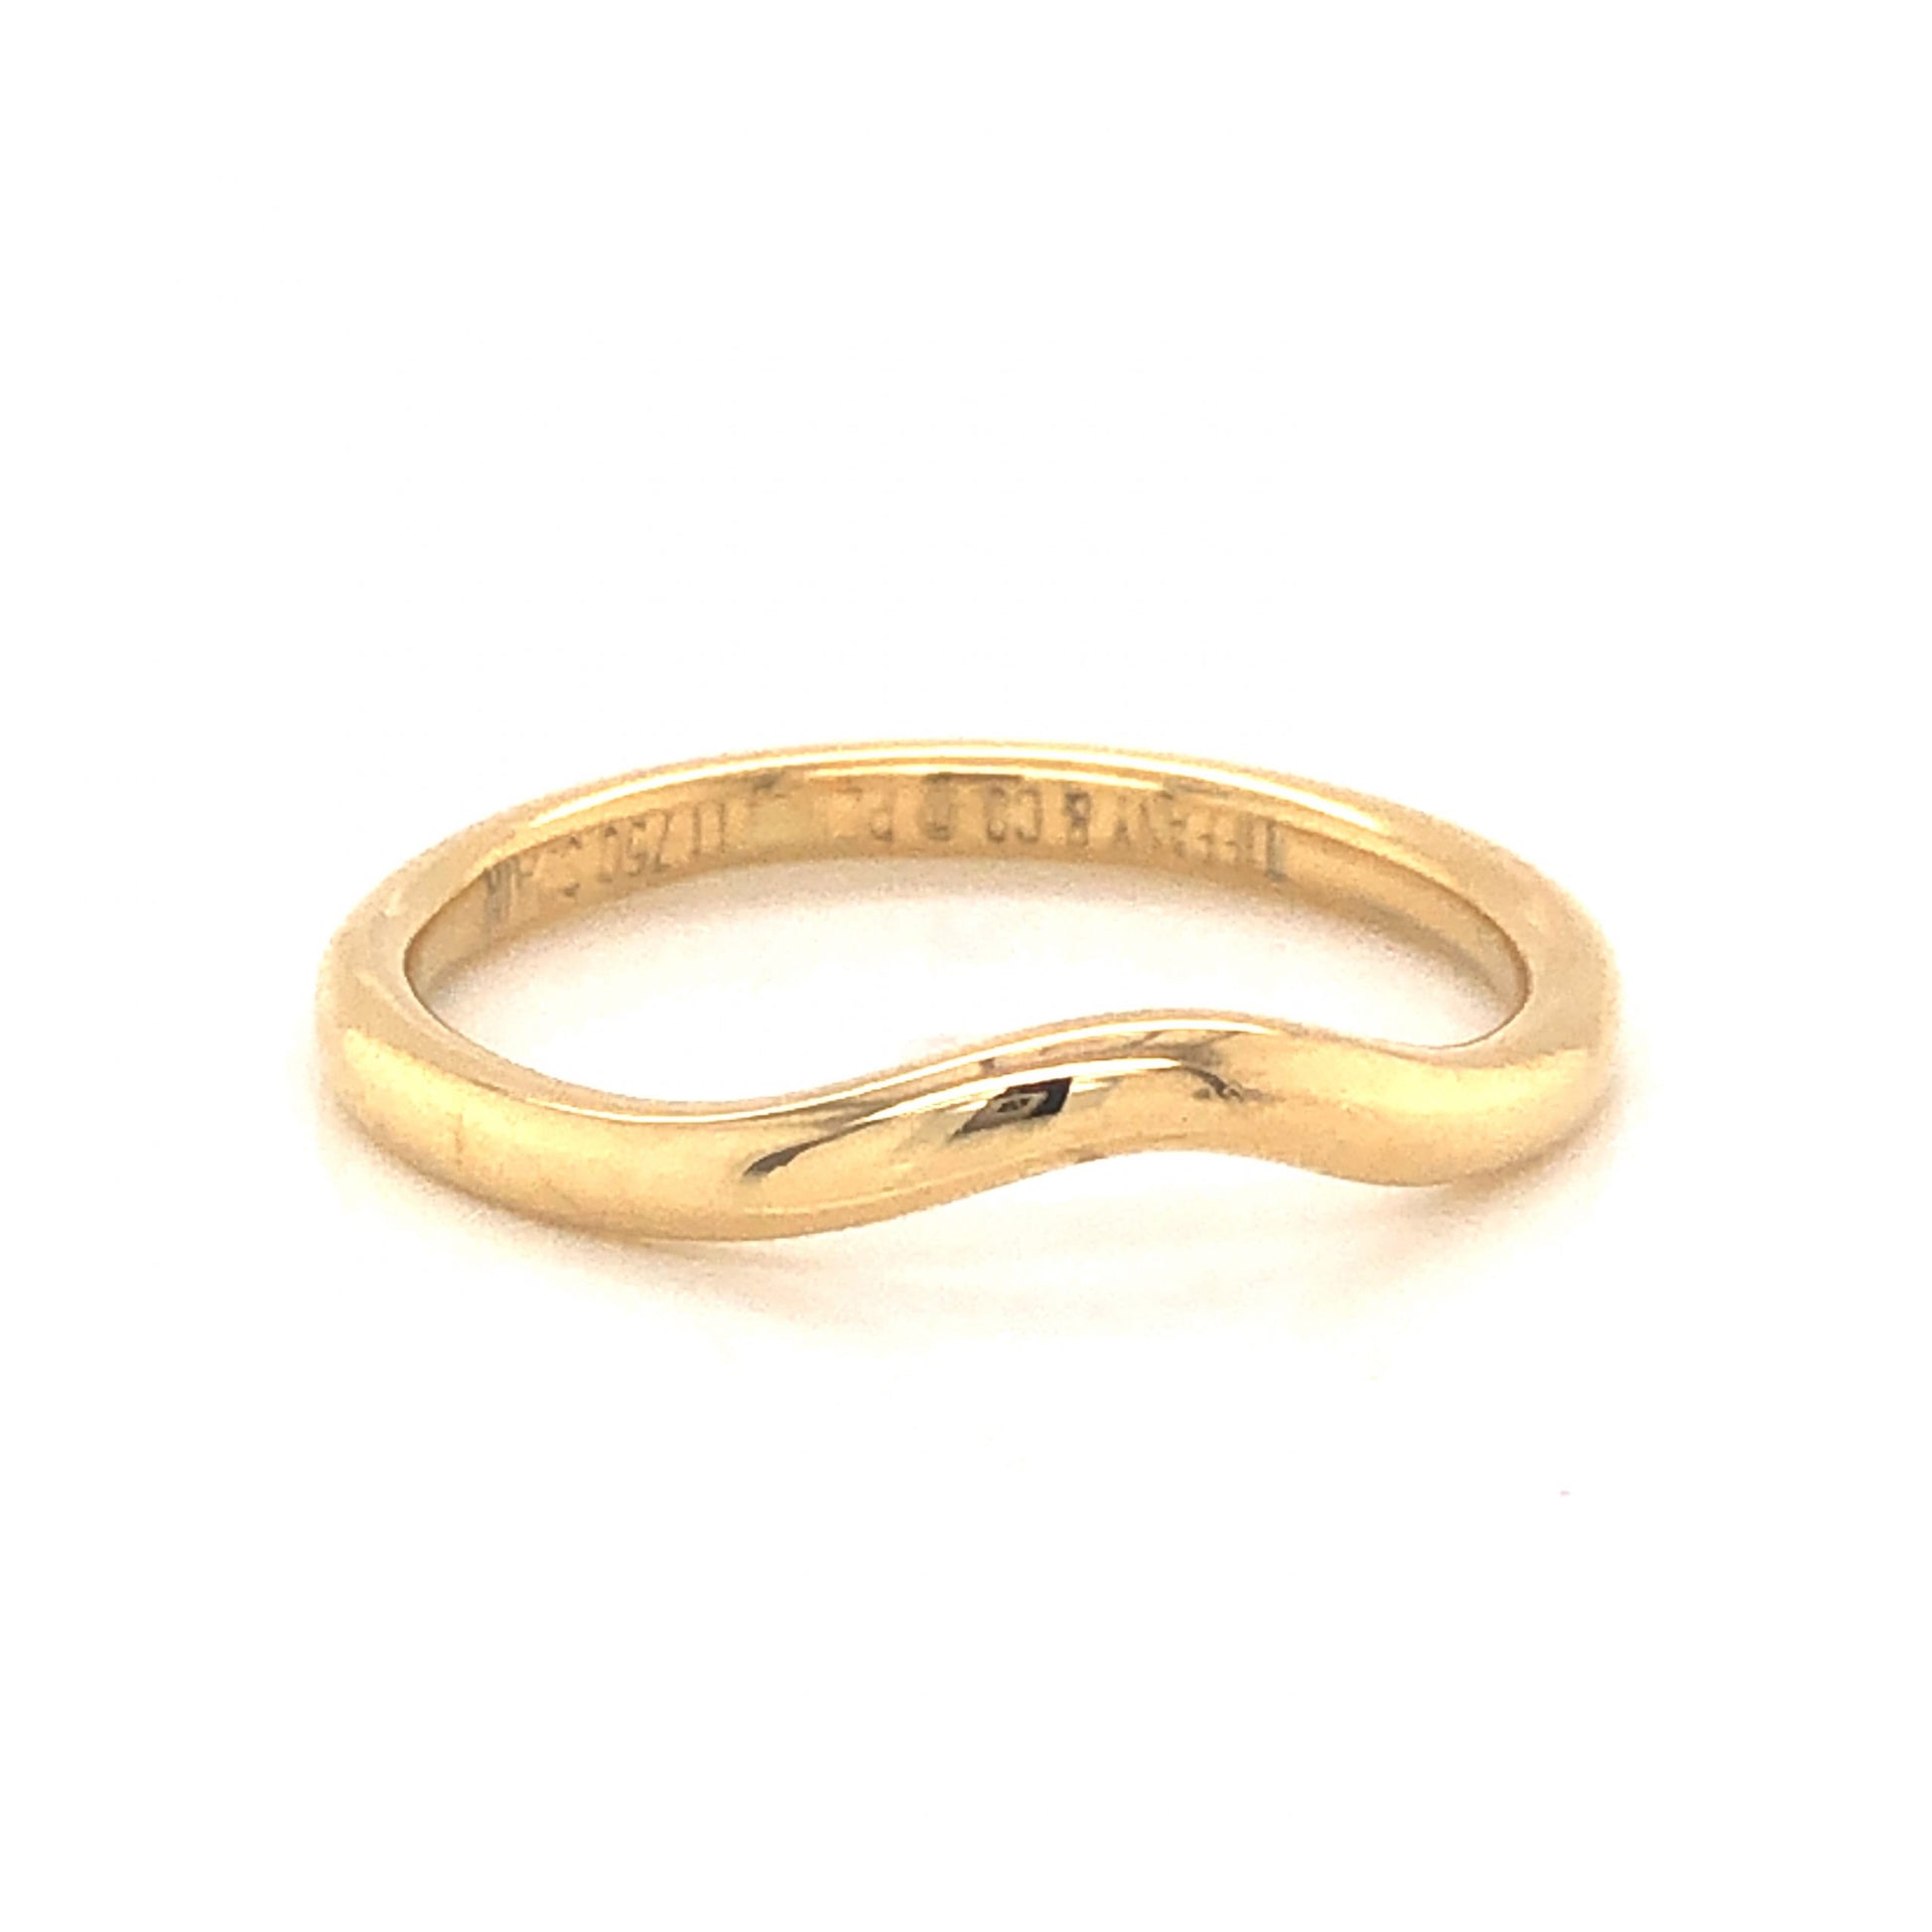 Tiffany & Co. Contoured Wedding Band in 18k Yellow GoldComposition: 18 Karat Yellow GoldRing Size: 5Total Gram Weight: 2.1 gInscription: Tiffany & Co. PERETTI 750 SPAIN